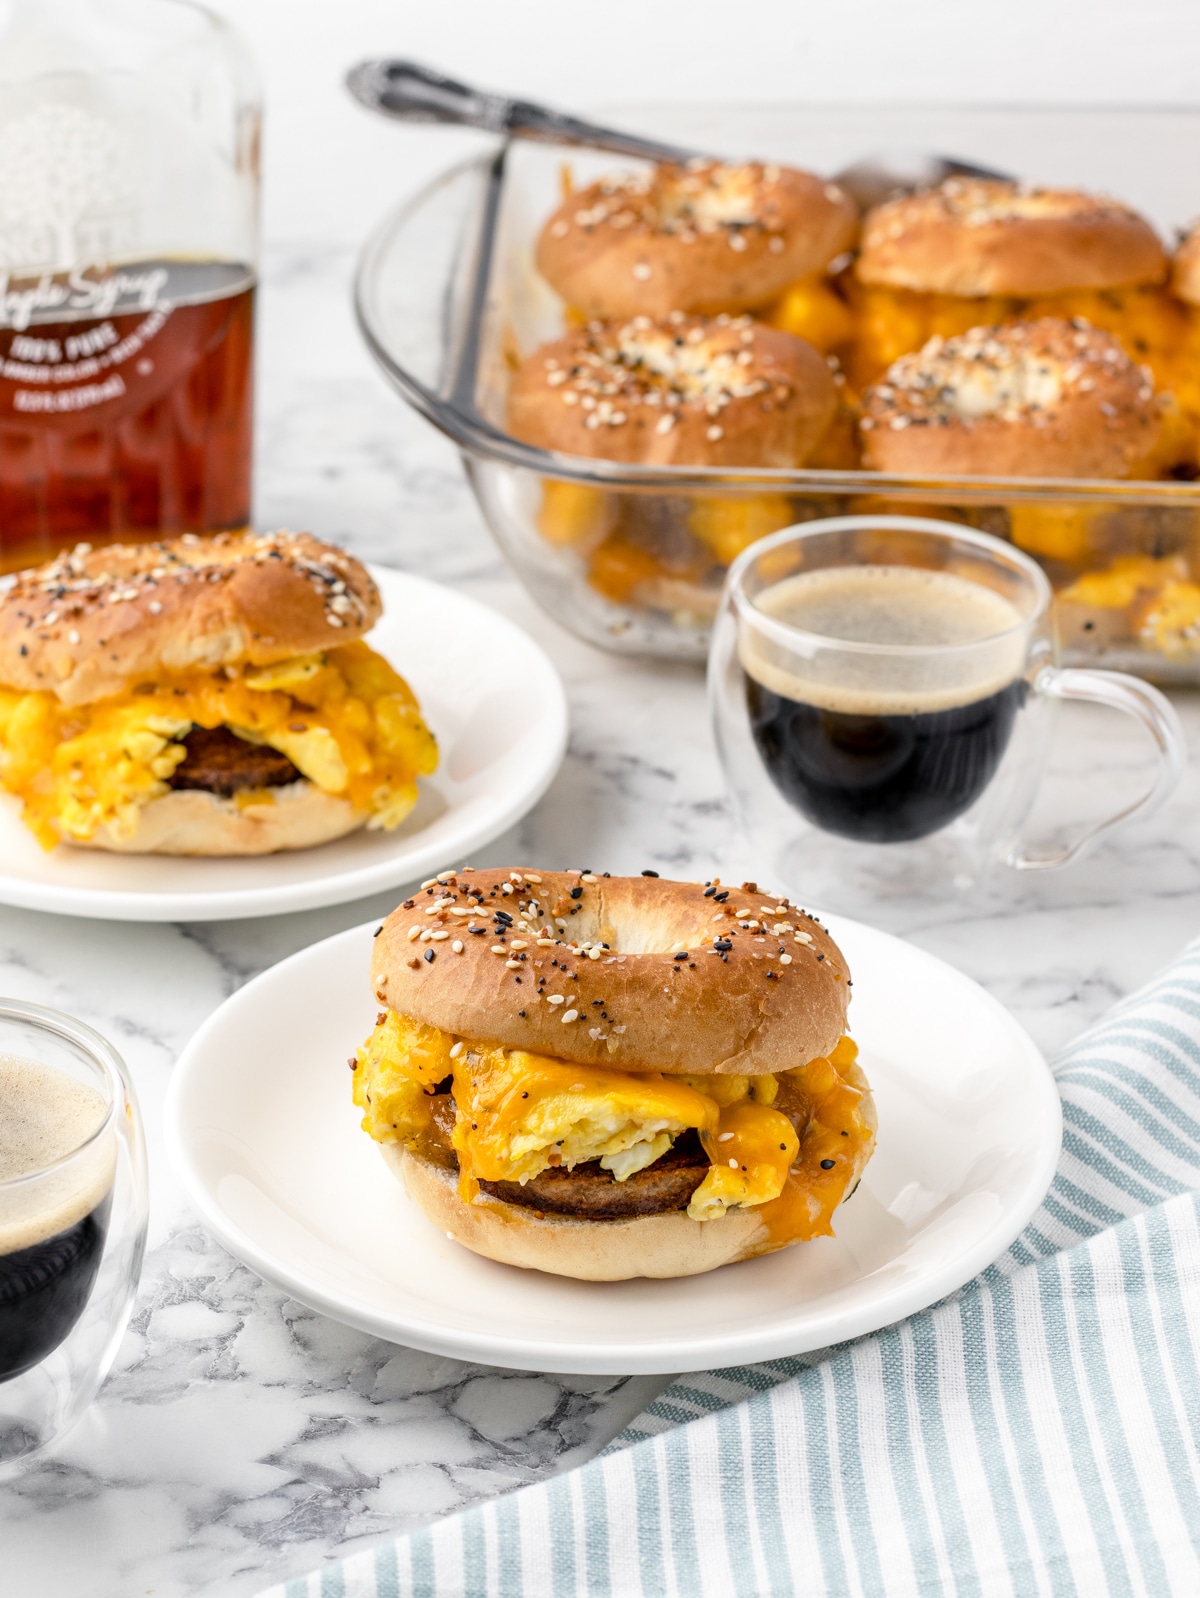 Sliders with hot espresso and maple syrup on the side.